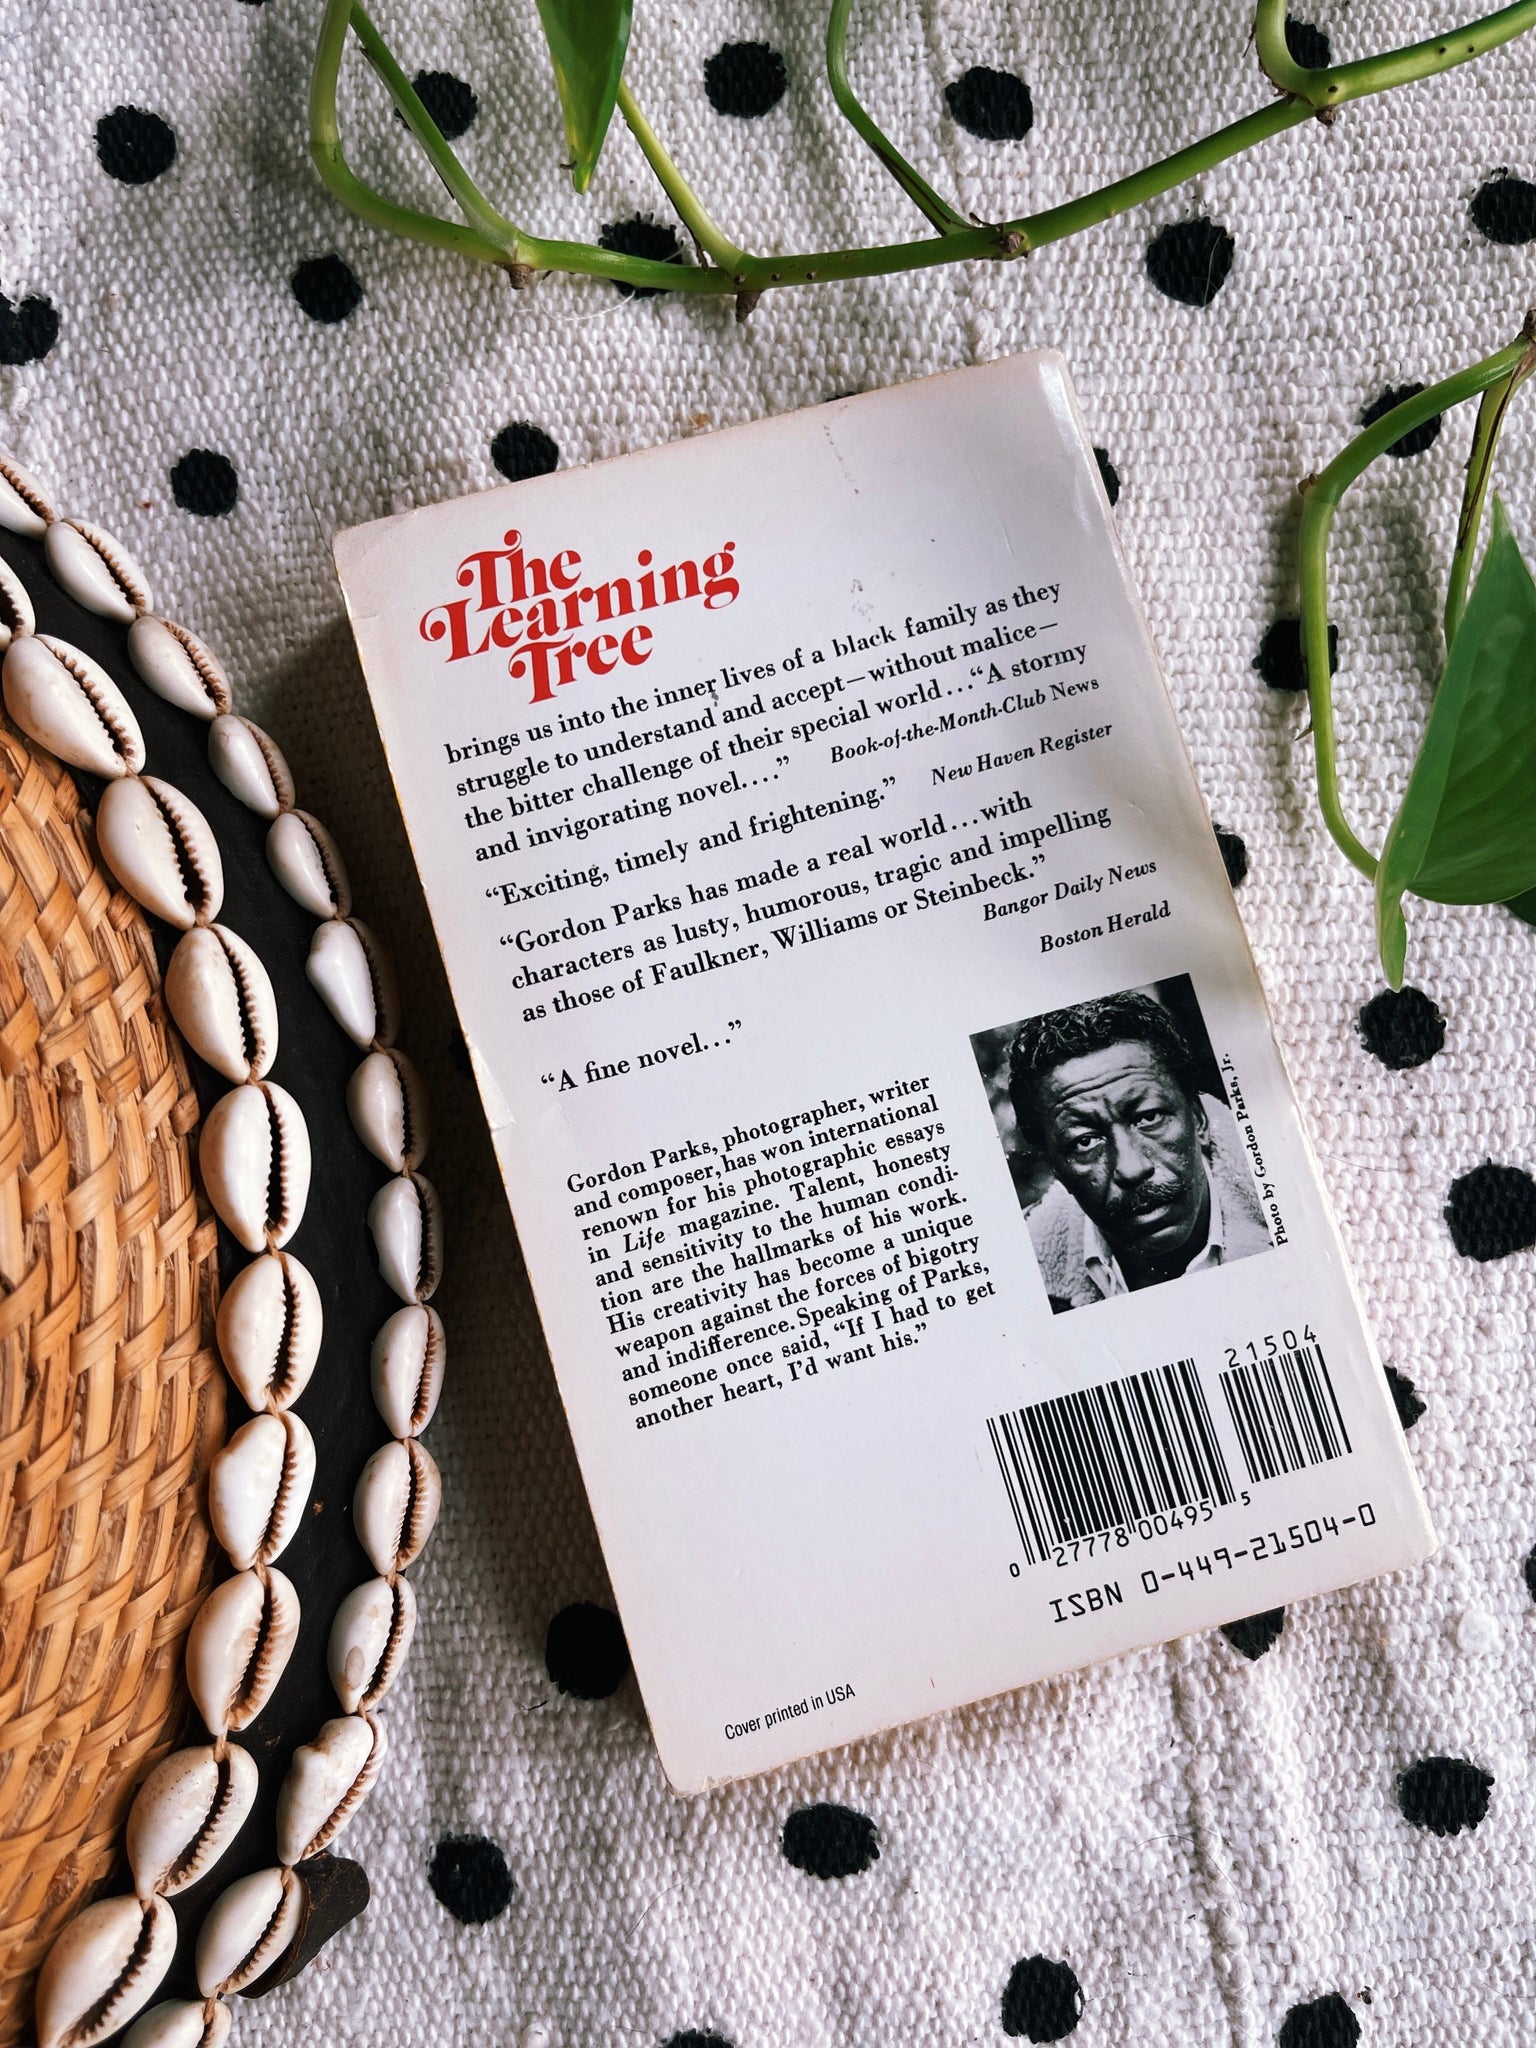 Vintage Softcover “The Learning Tree” by Gordon Parks (1989)